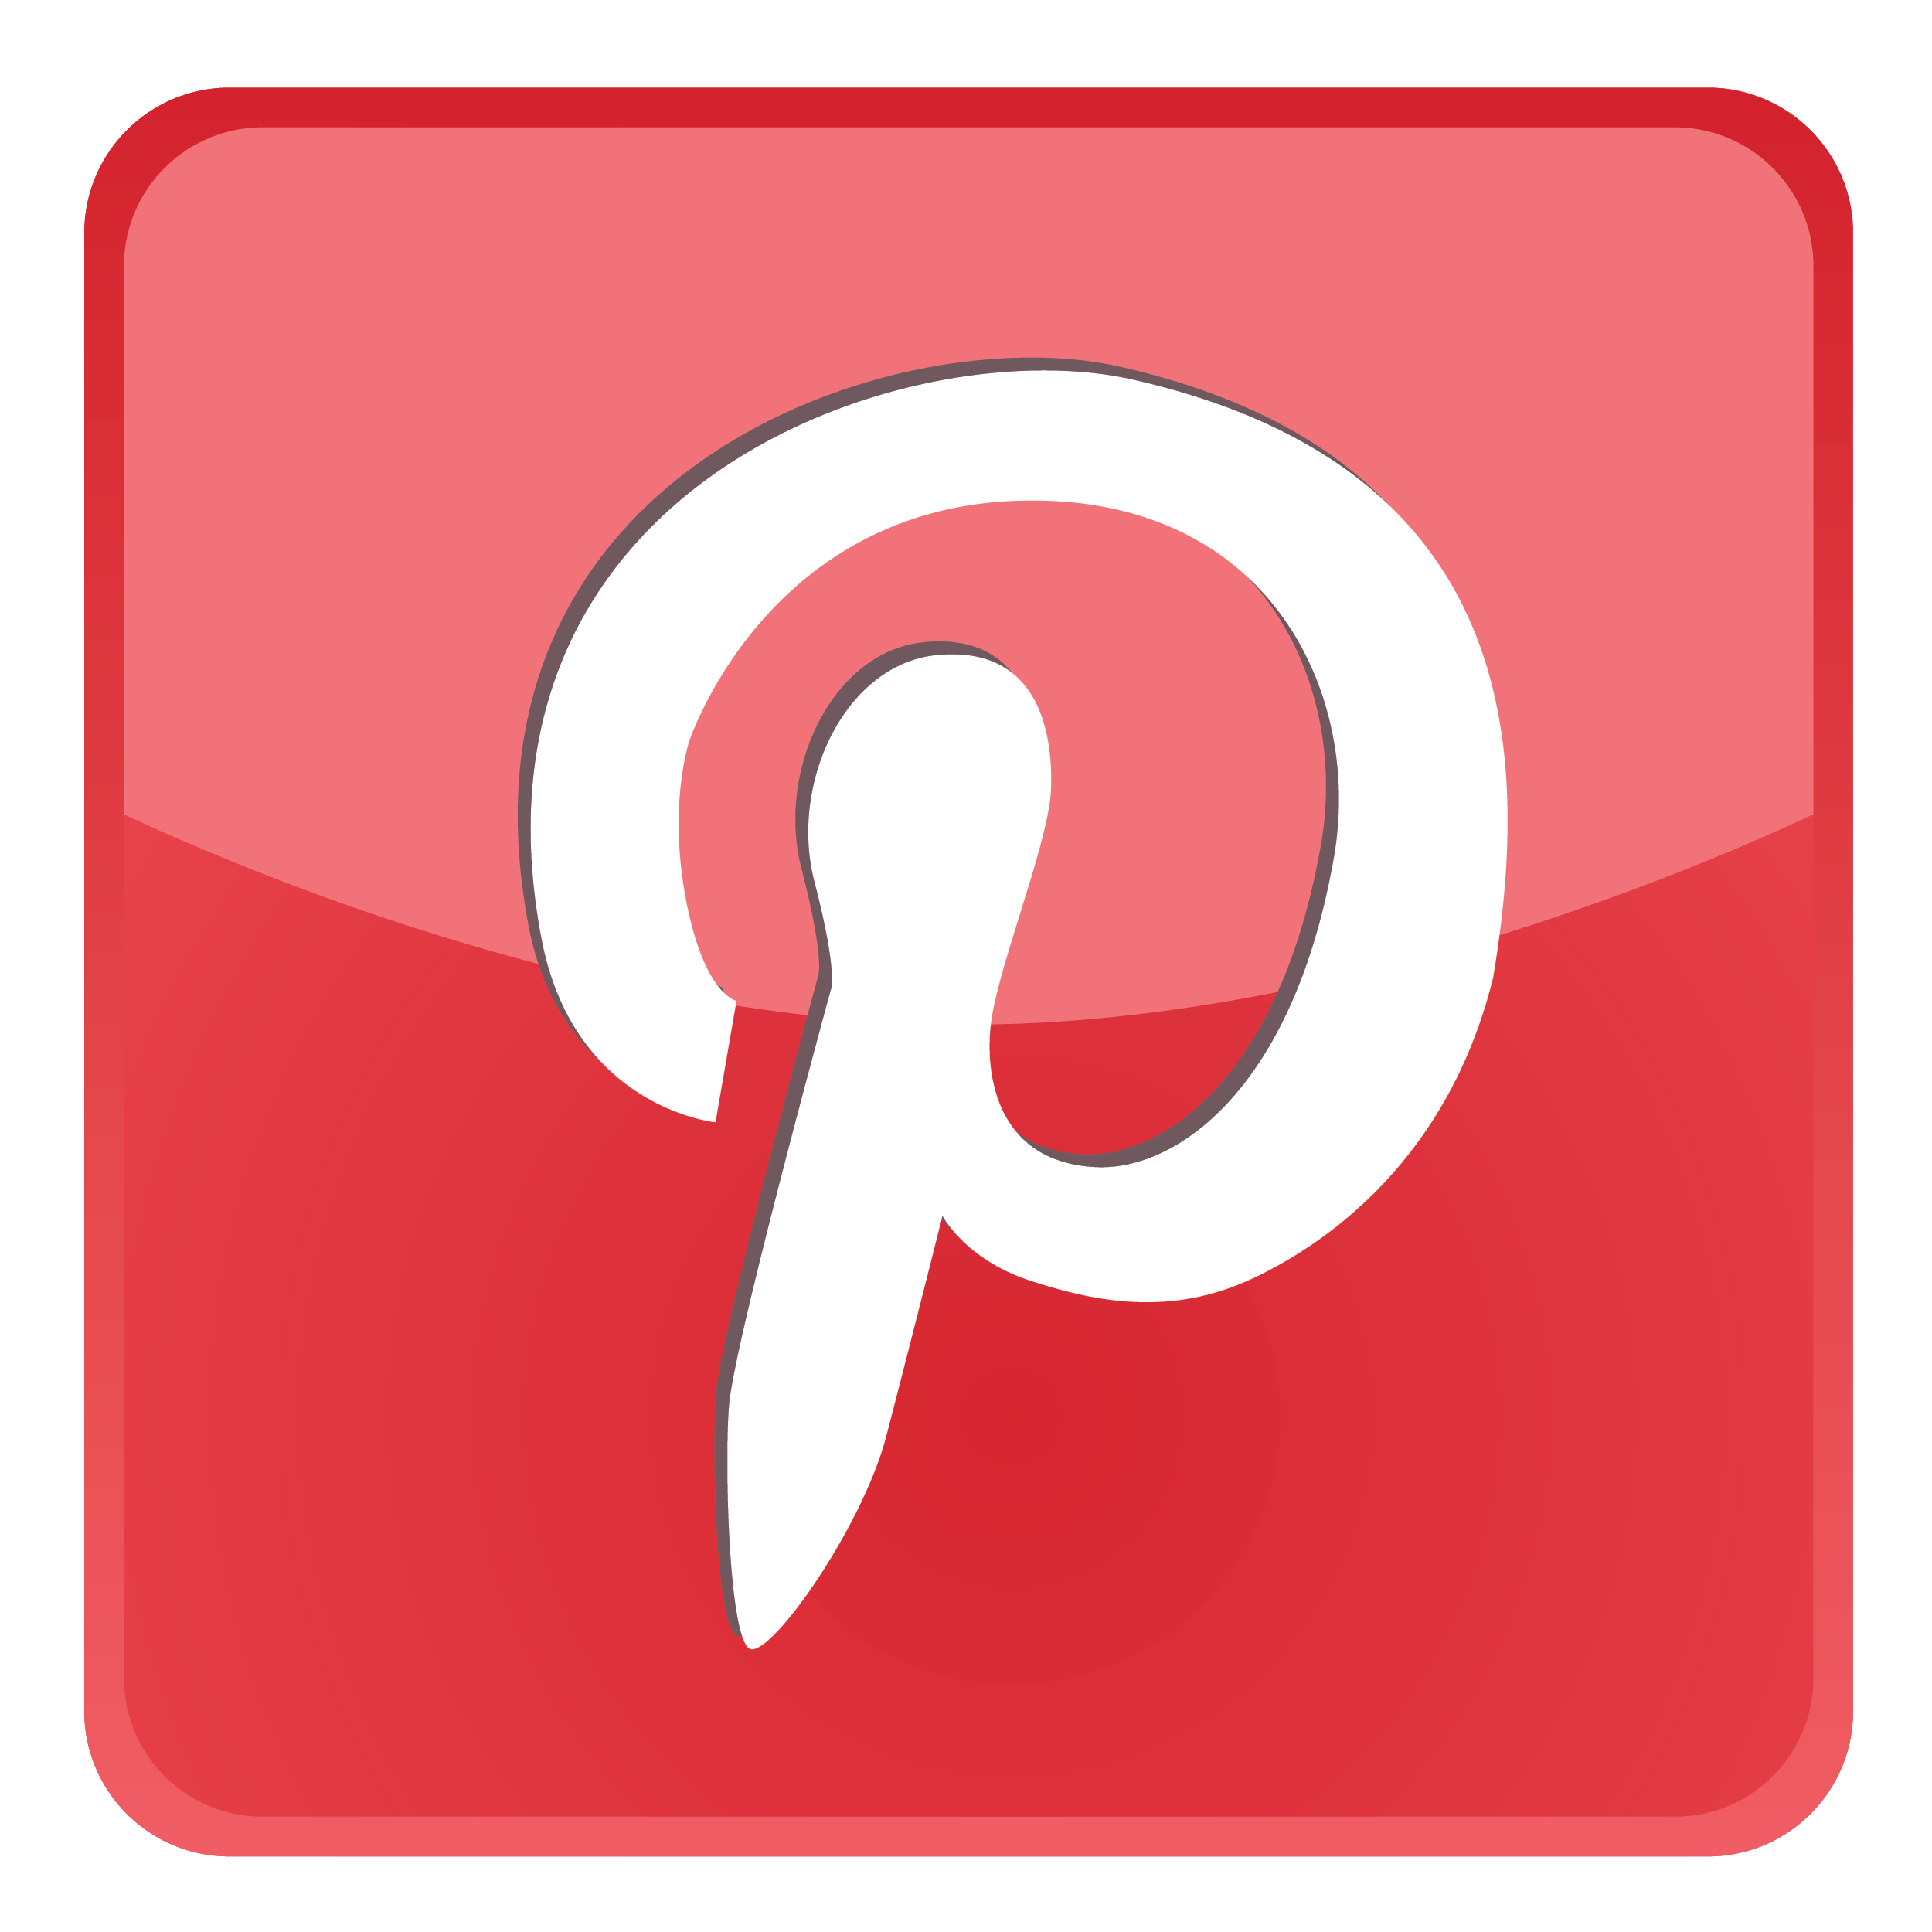 We have a Pinterest Page!